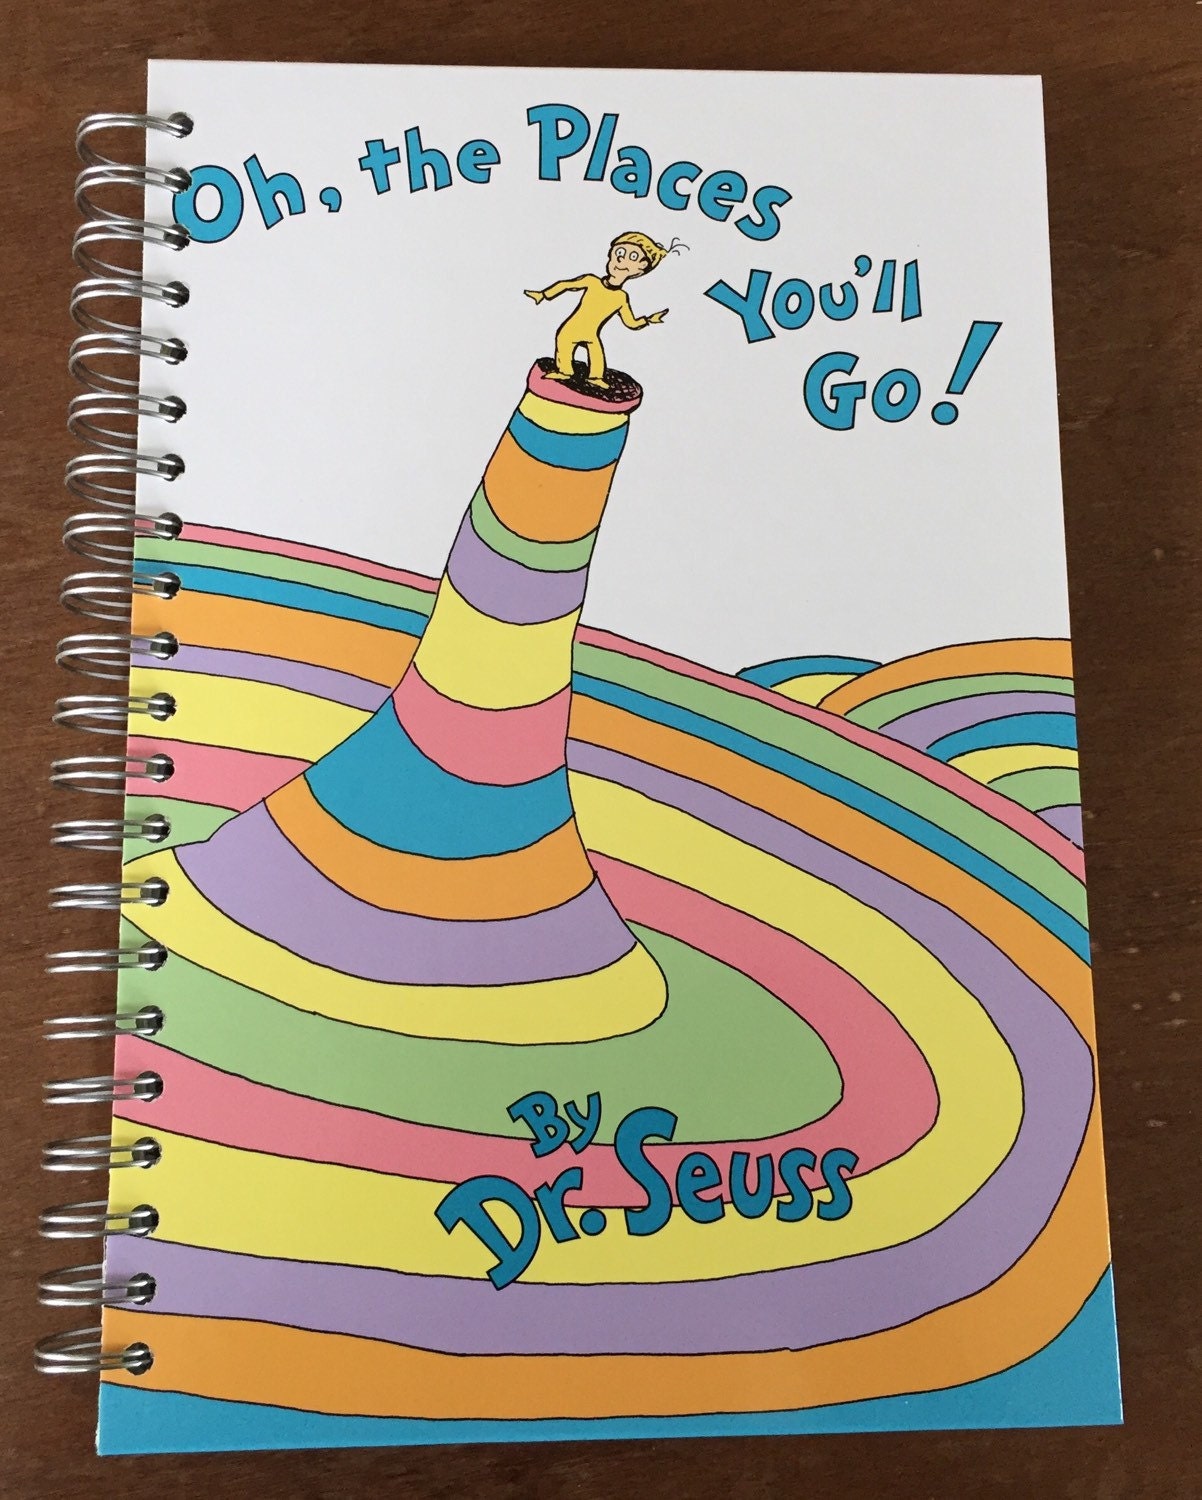 Graduation Gift // Oh The Places You'll Go by Dr Seuss